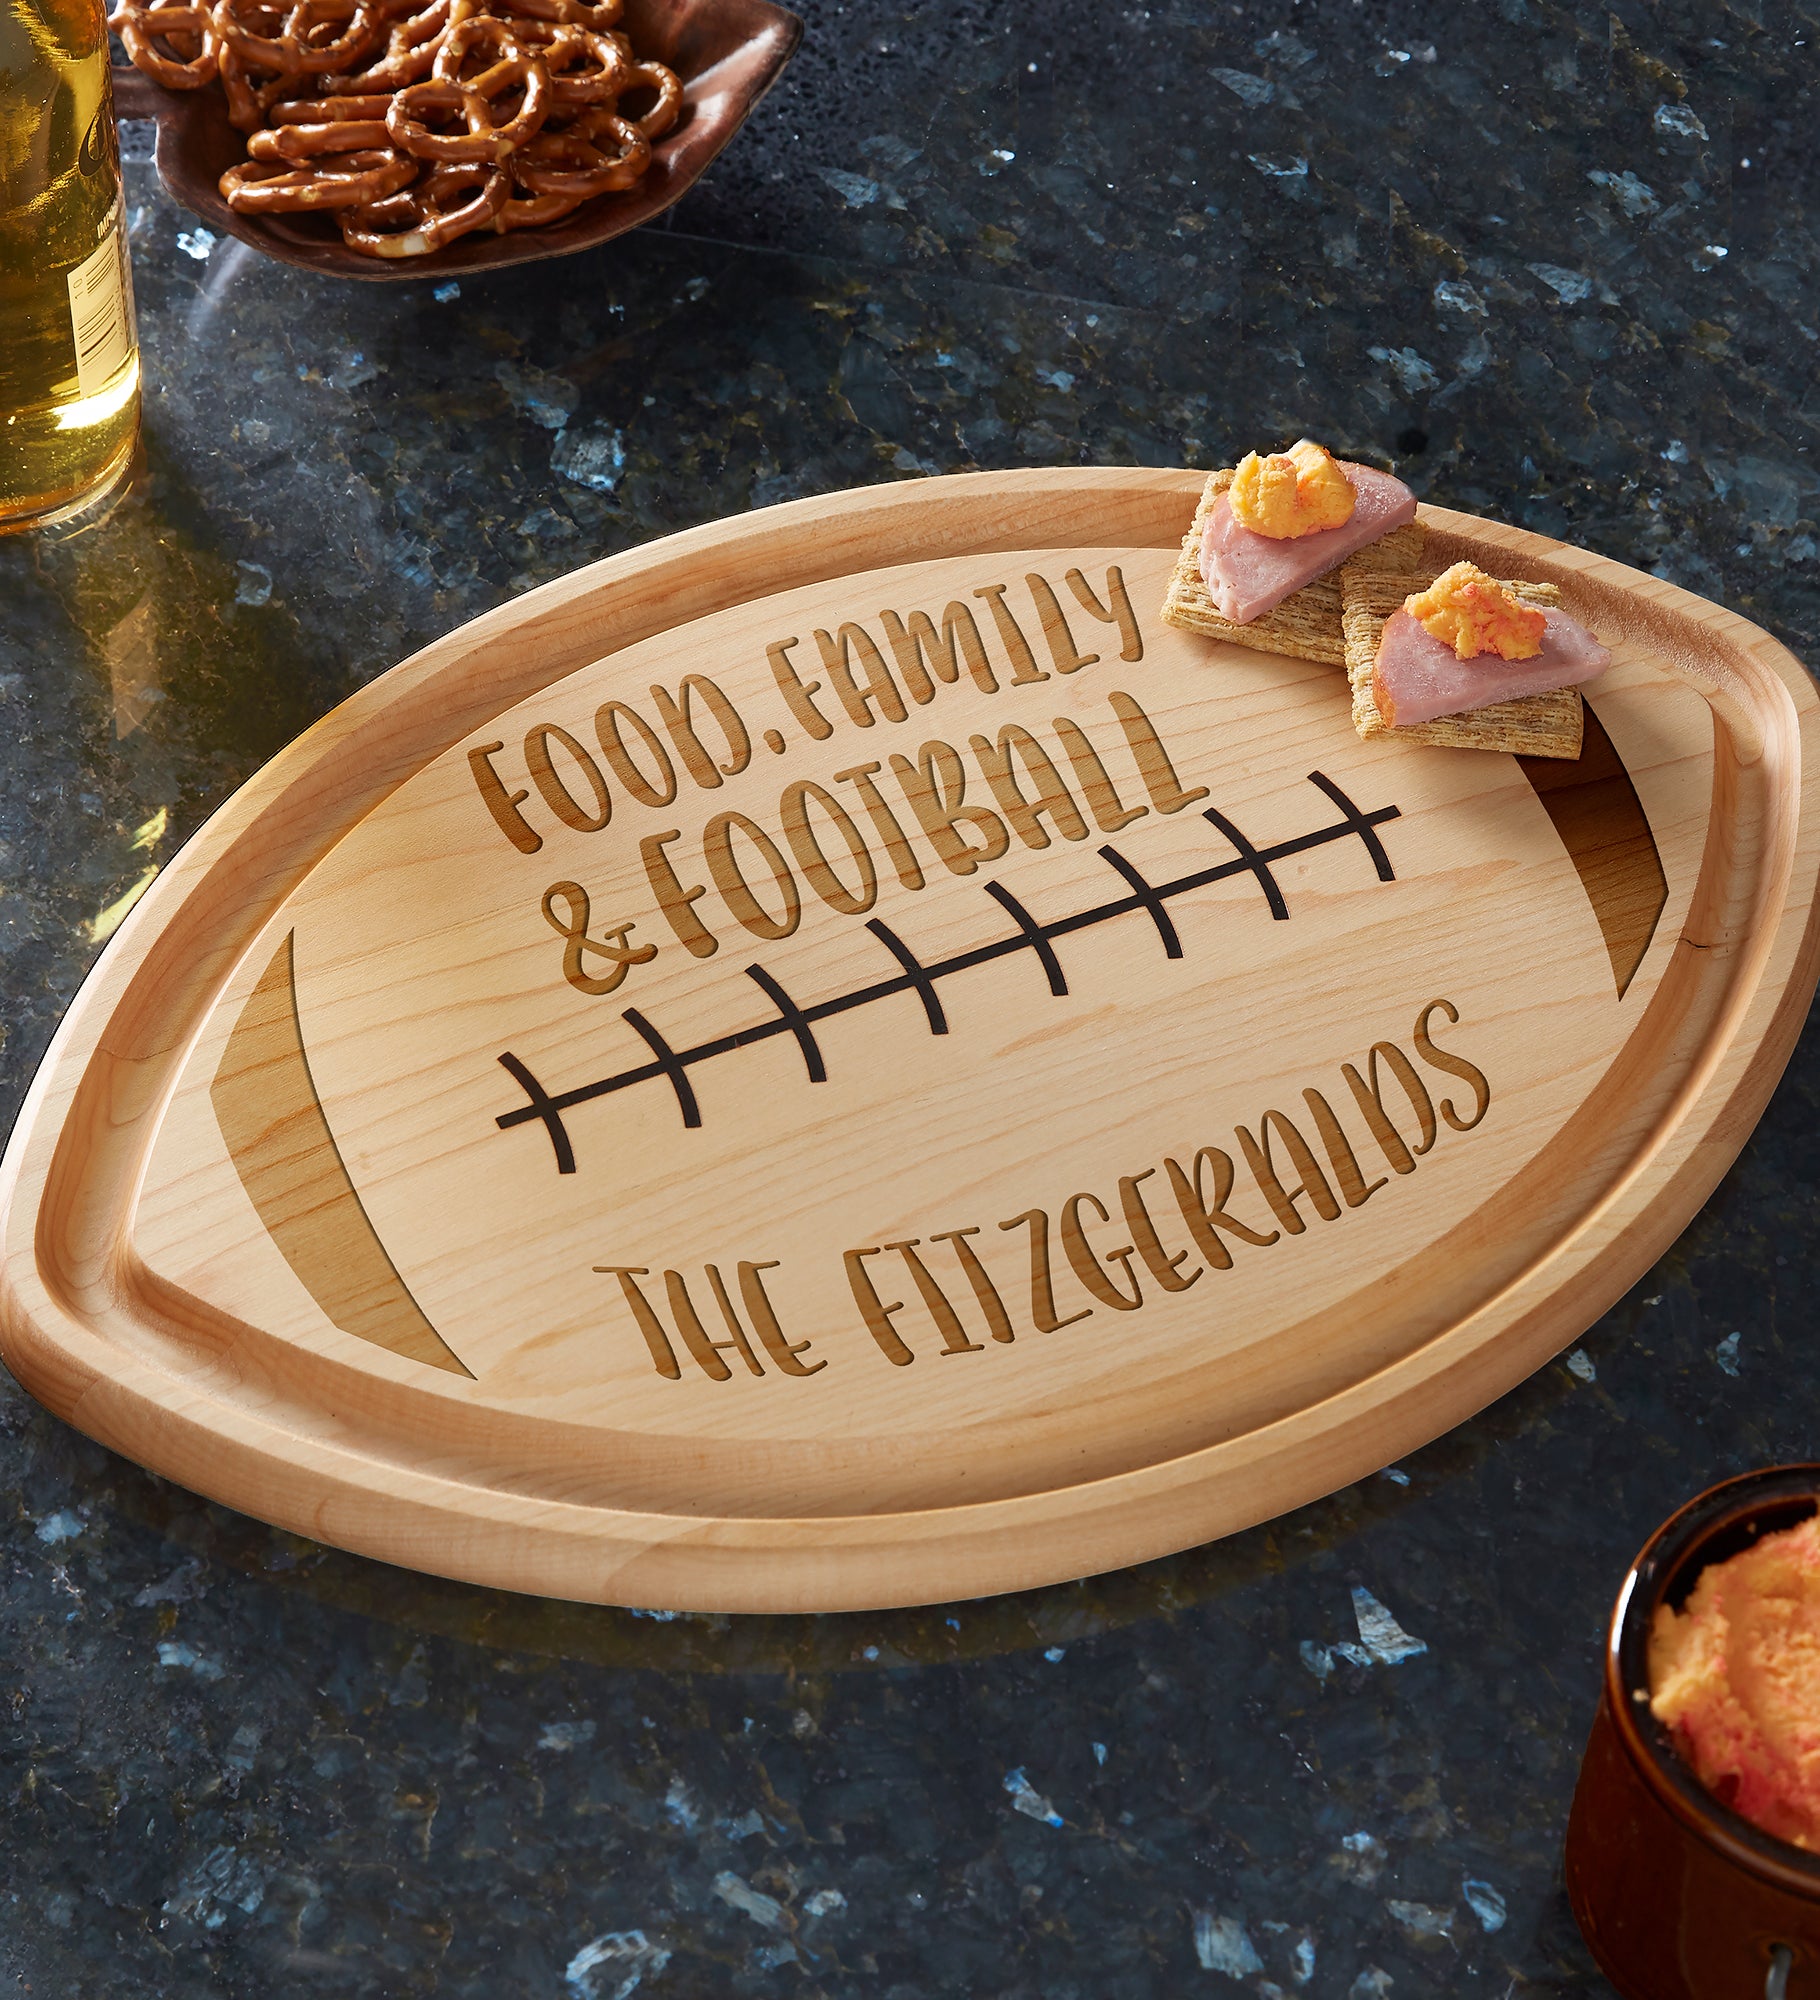 Personalization Mall Key to Our Home Personalized Maple Cutting Board